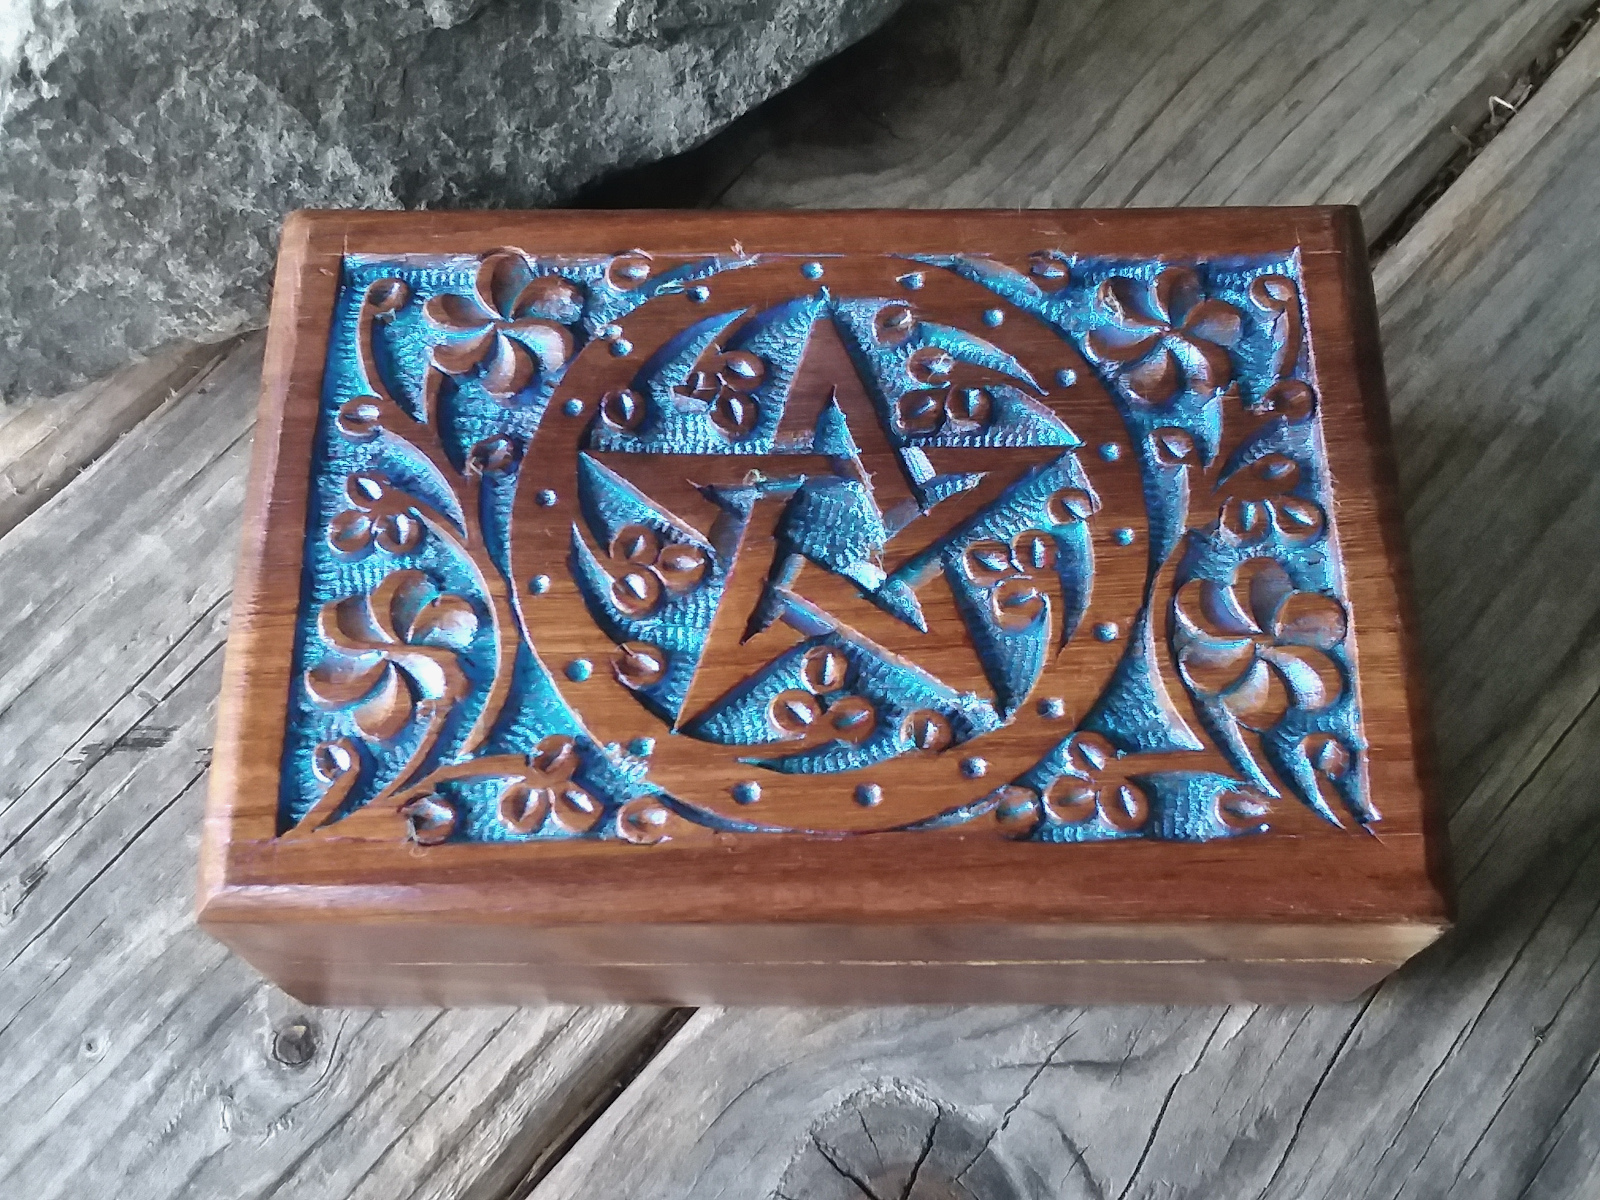 Pentacle floral carved wood box 4x6 Blue finish - Click Image to Close